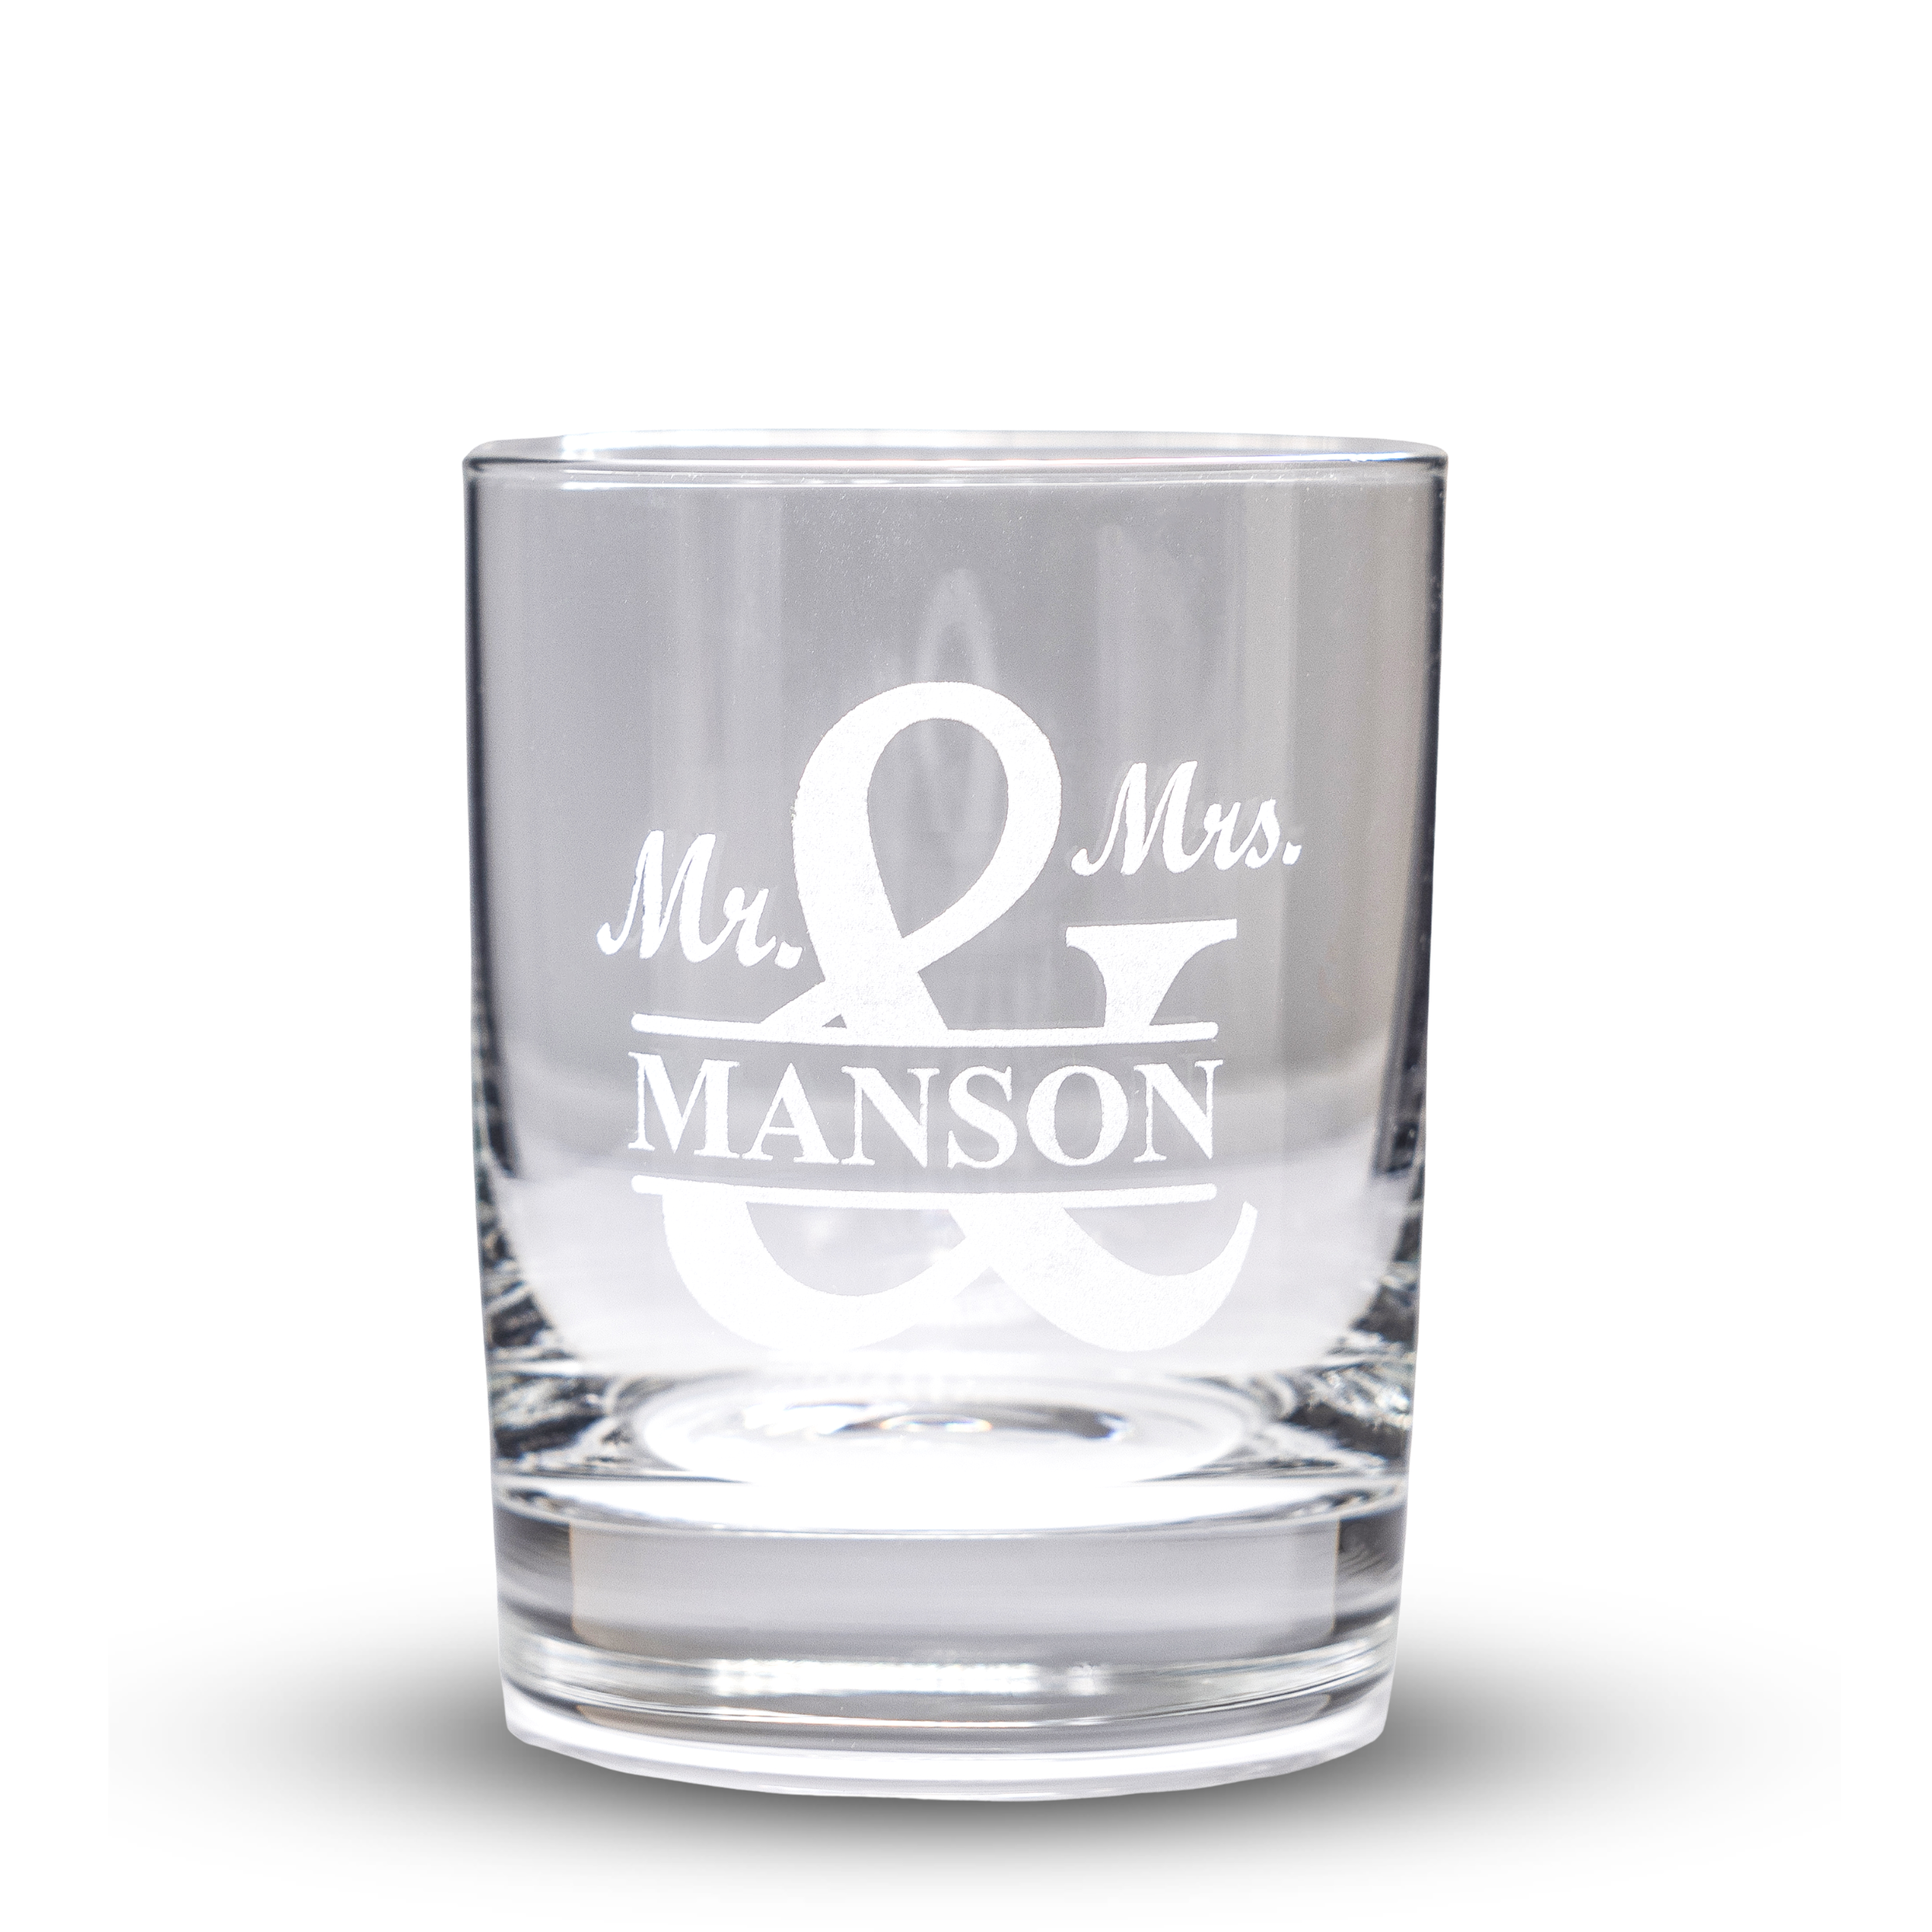 https://giftsinscribed.com/wp-content/uploads/engraved-whiskey-glass-empty.png